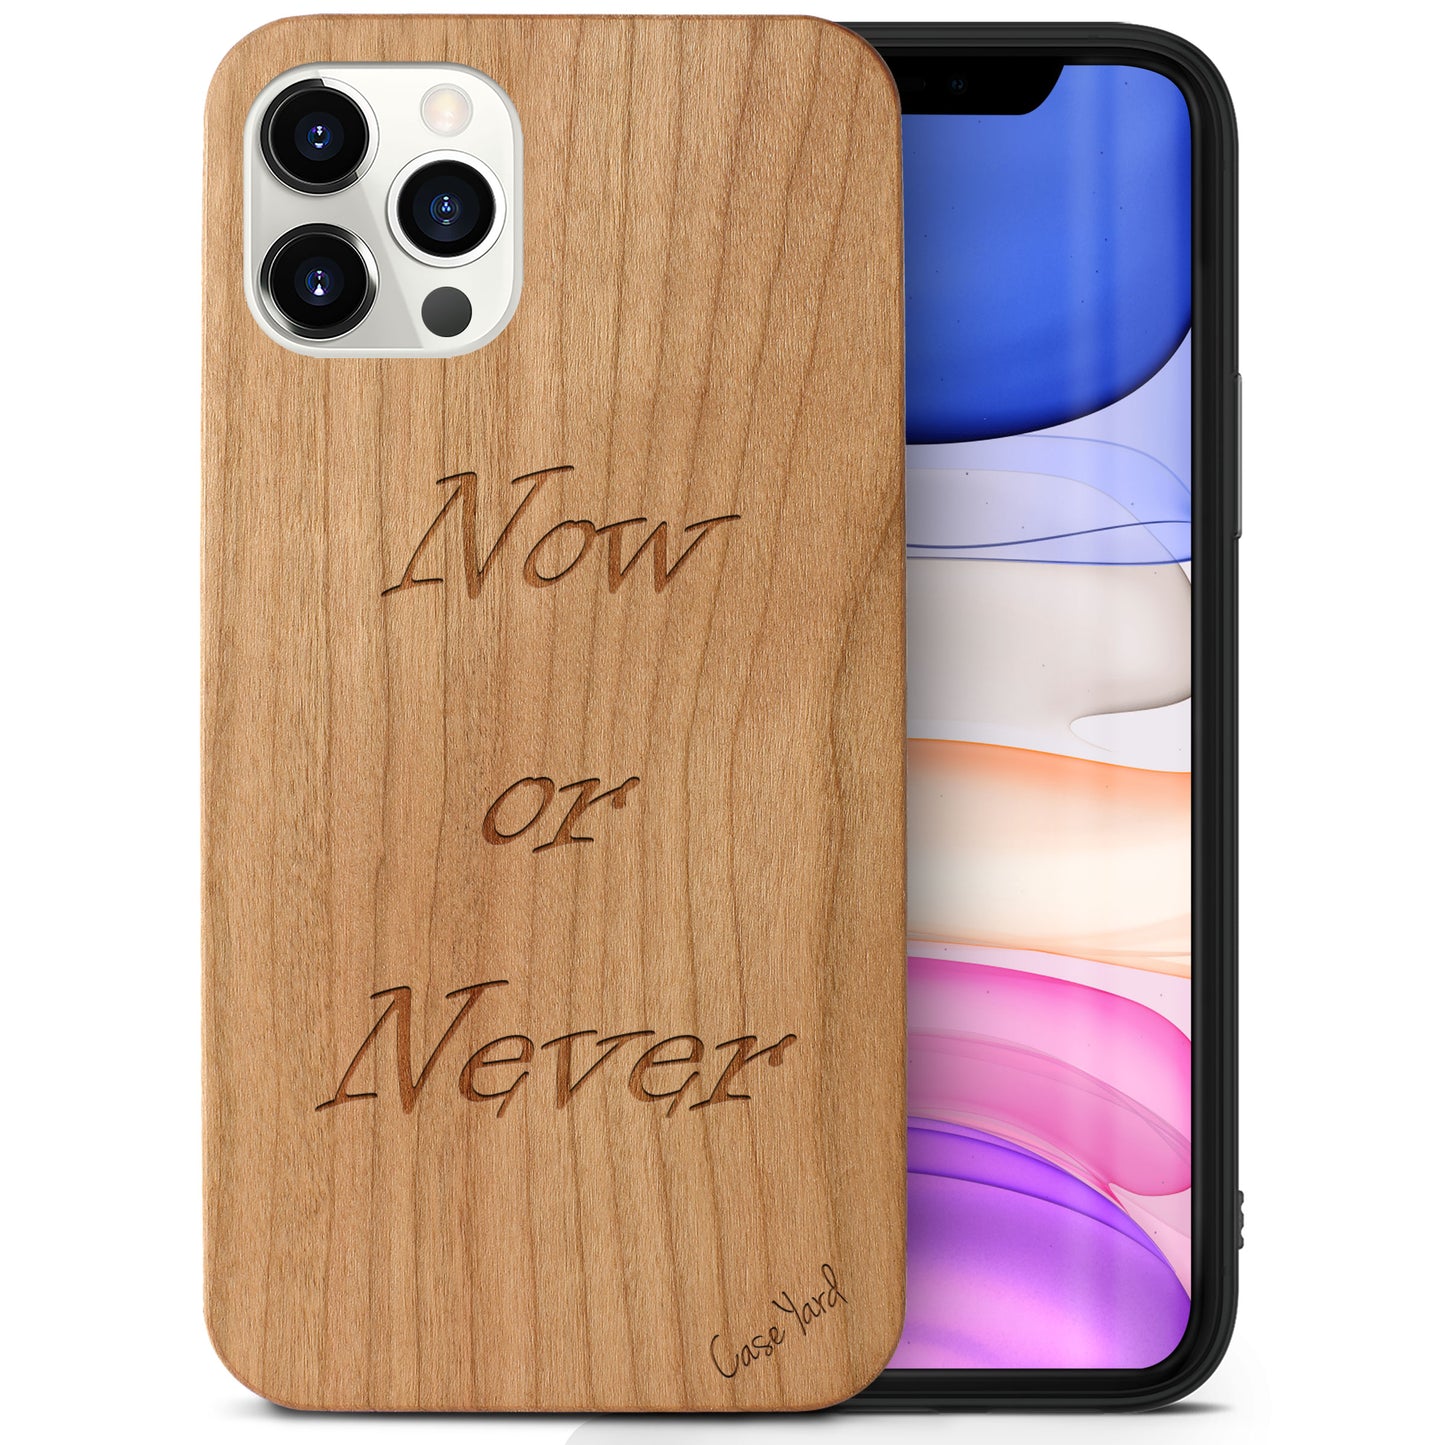 Wooden Cell Phone Case Cover, Laser Engraved case for iPhone & Samsung phone Now or Never Design